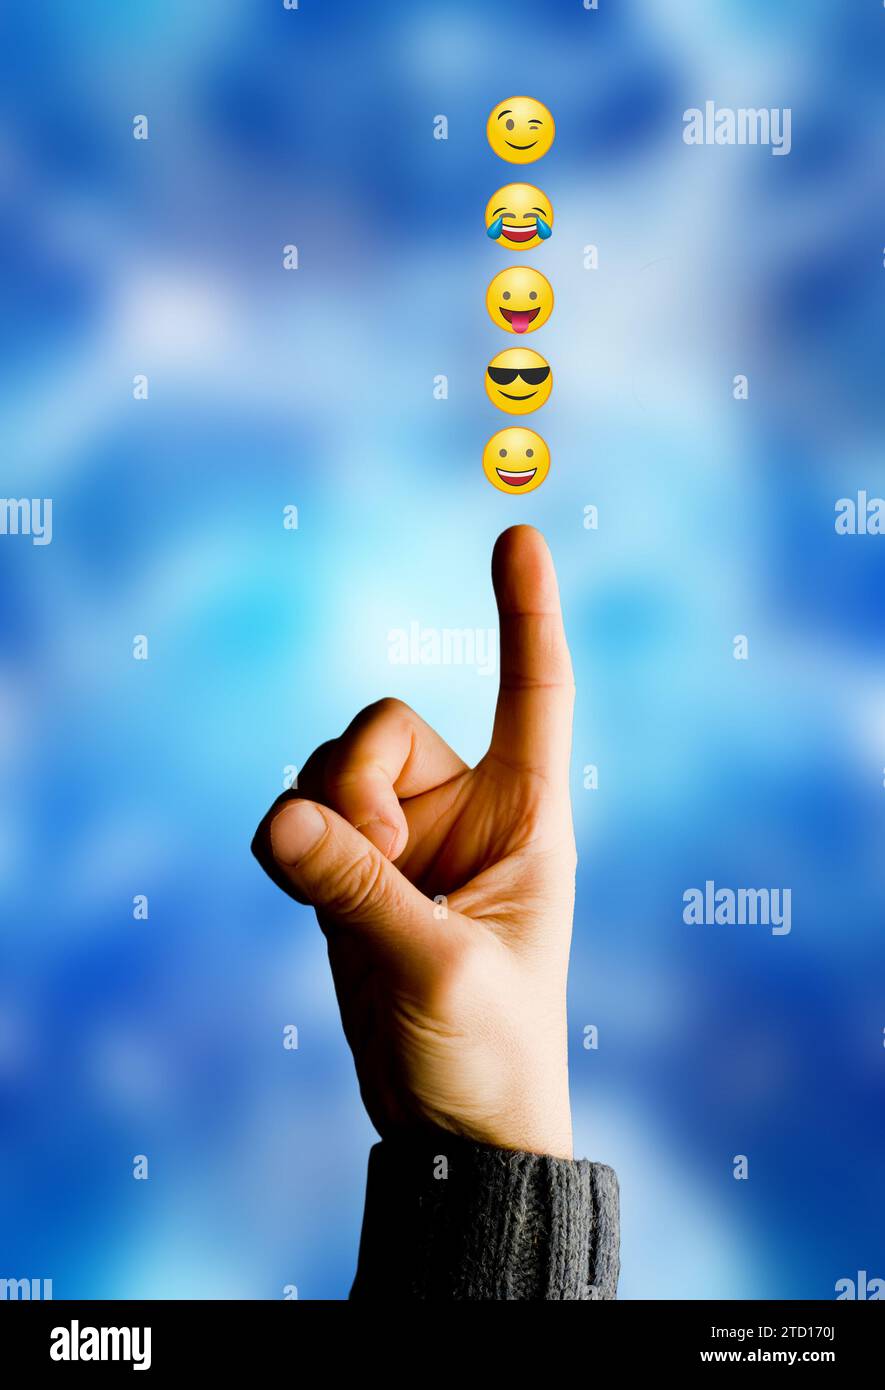 finger pointing up and various emoticons of happiness, laugh and cool Stock Photo